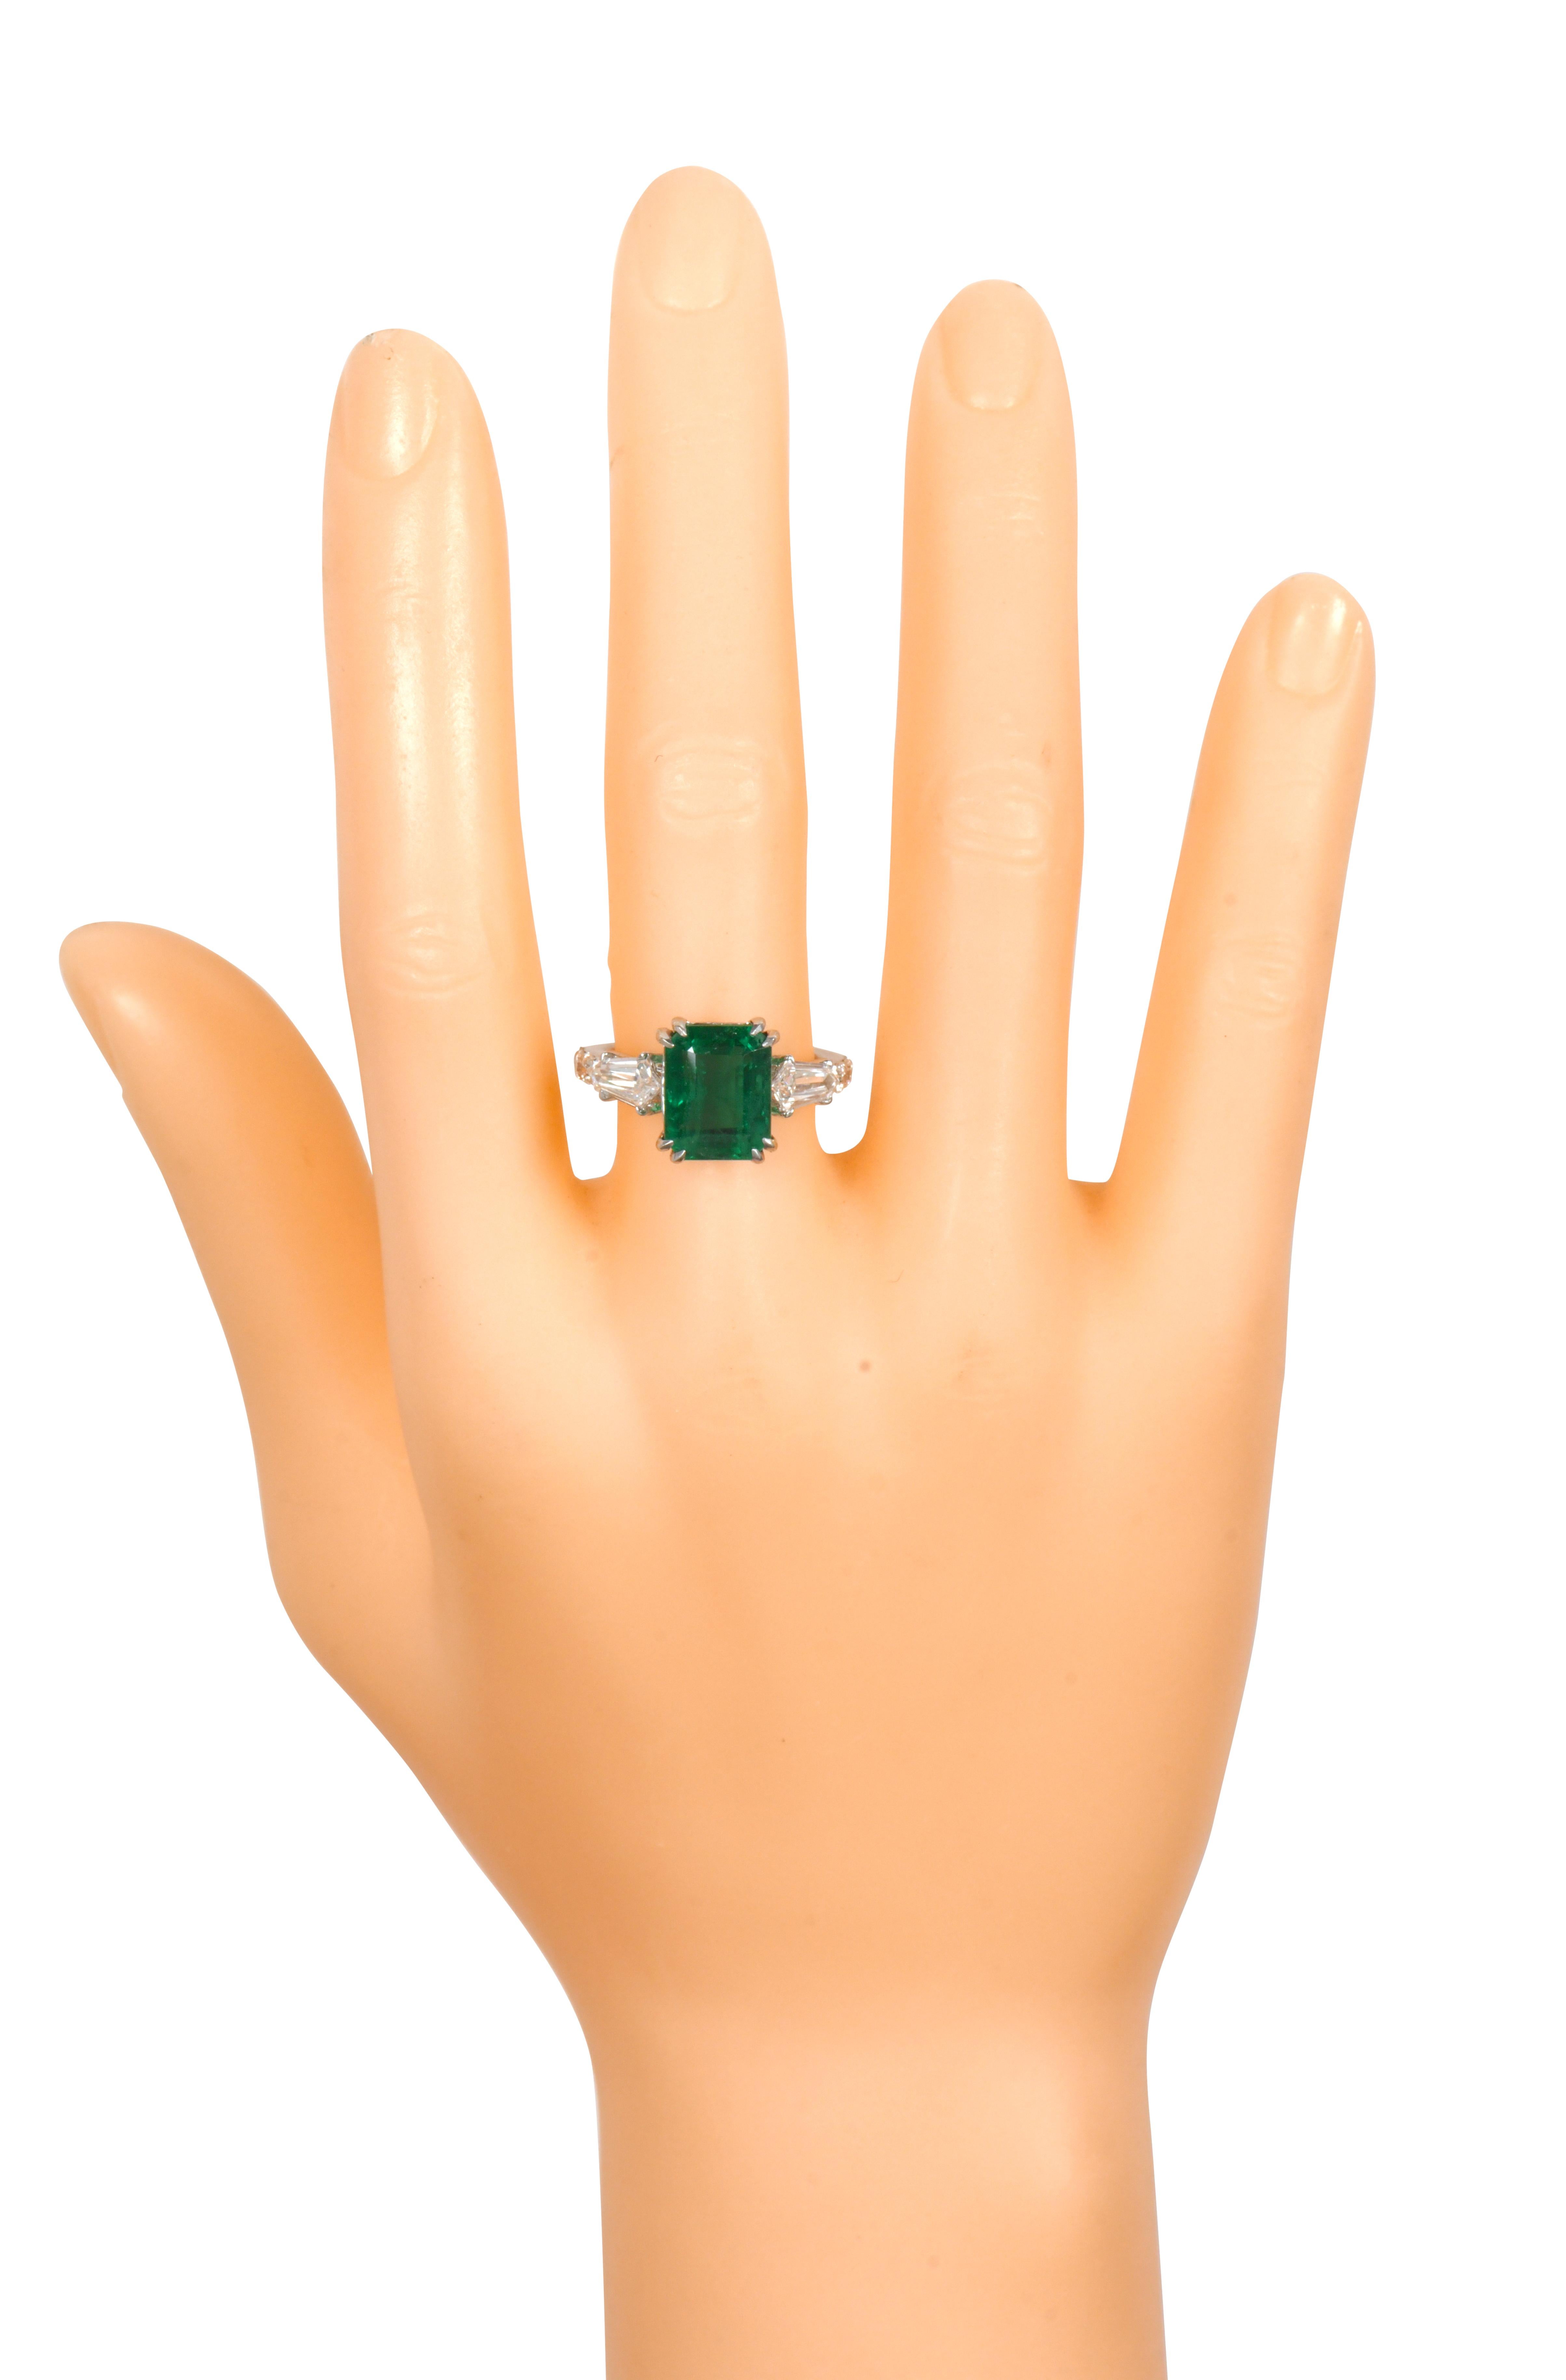 18 Karat White Gold 6.24 Carat Vivid Green Emerald and Diamond Solitaire Cocktail Ring

This glorious trinity vivid green emerald and diamond ring is impeccable. The three-stone trinity ring tells a story by not only representing the said “past,